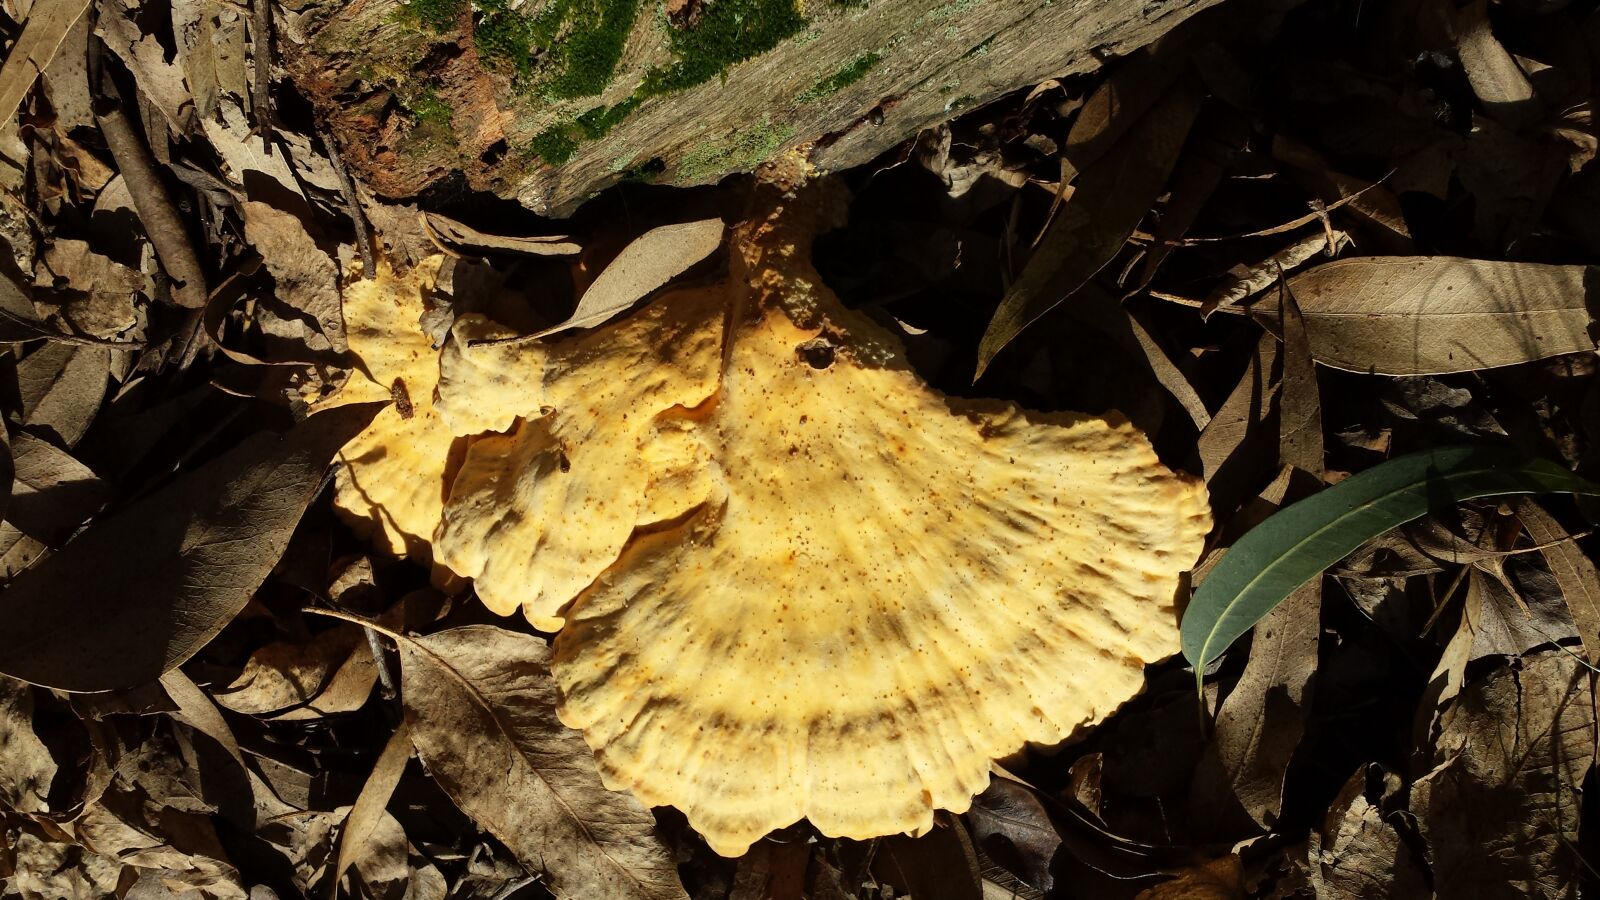 Samsung Galaxy S4 sample photo. Fungi, nature, forest photography